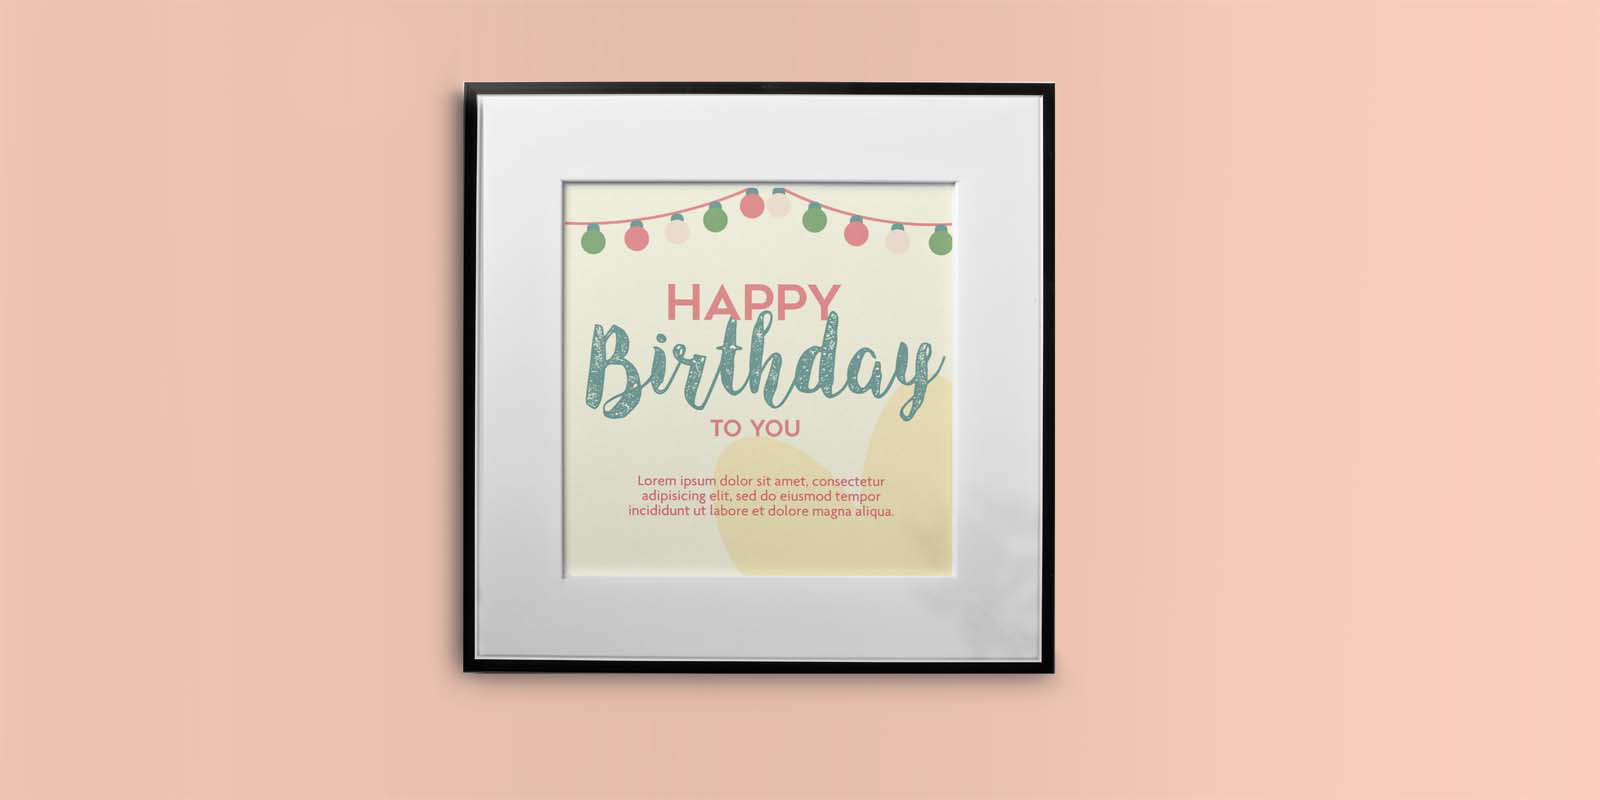 Birthday prints in Brisbane - Print with Pagerr